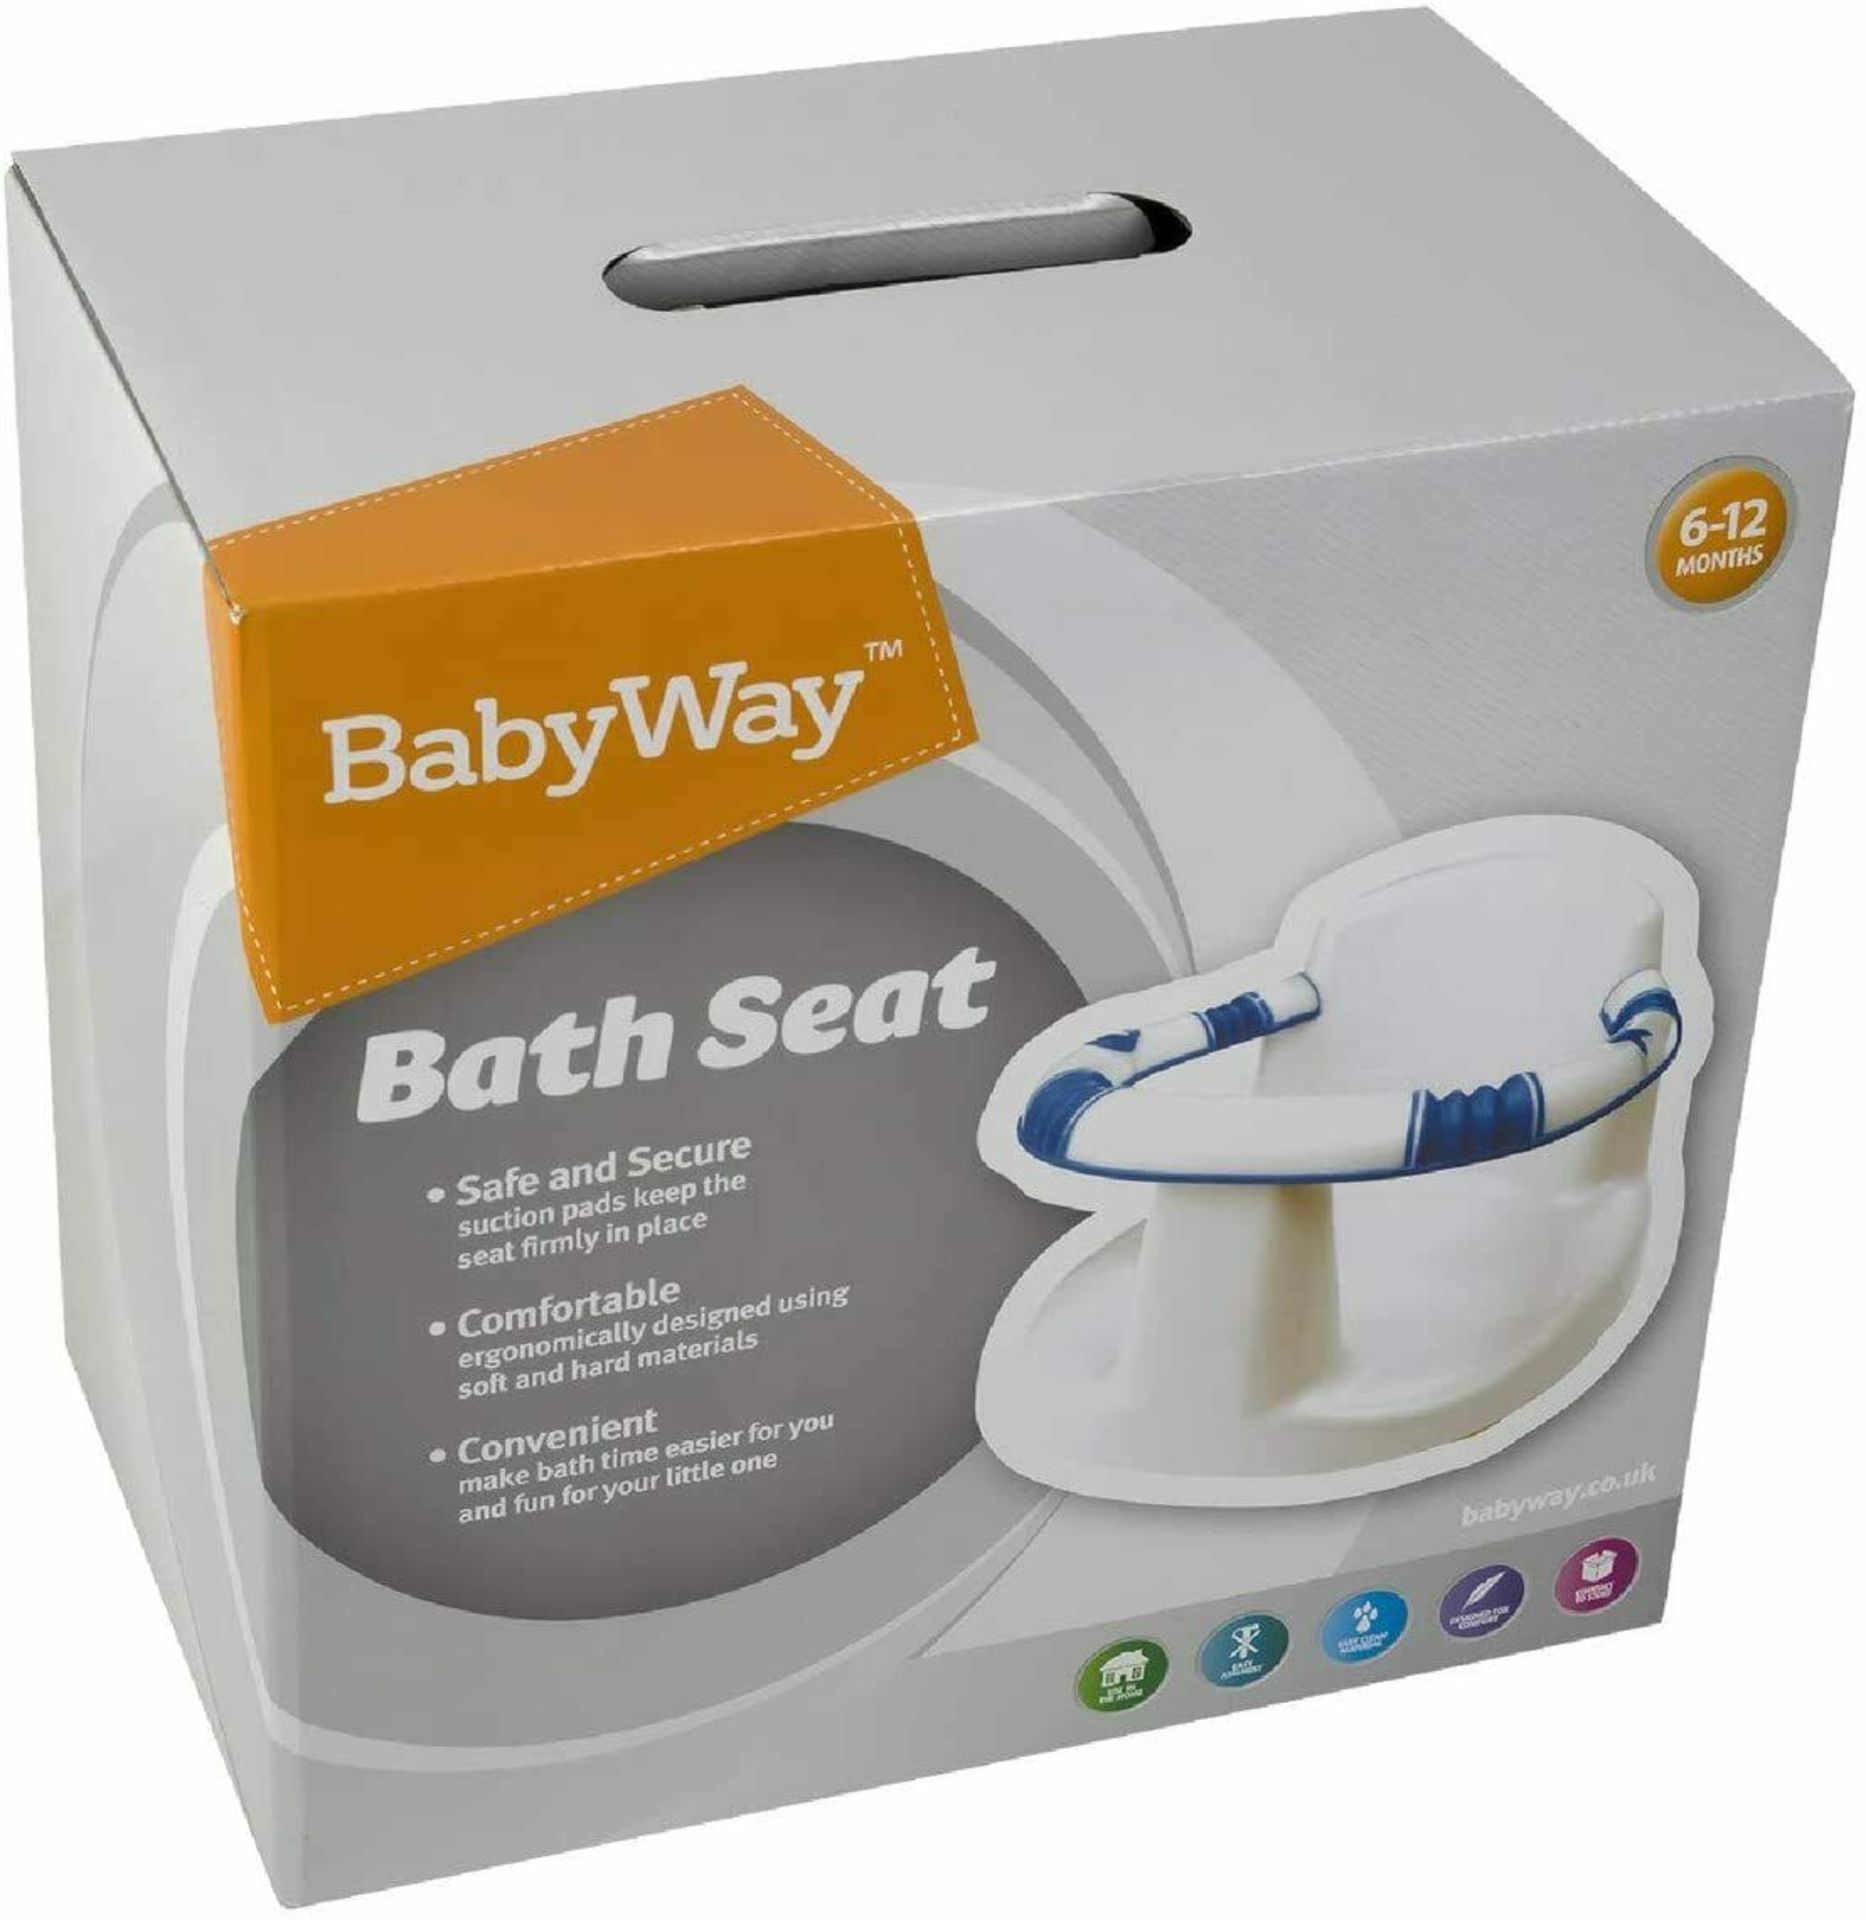 new babyway 6m-12m baby bath support seat 4x suction pad